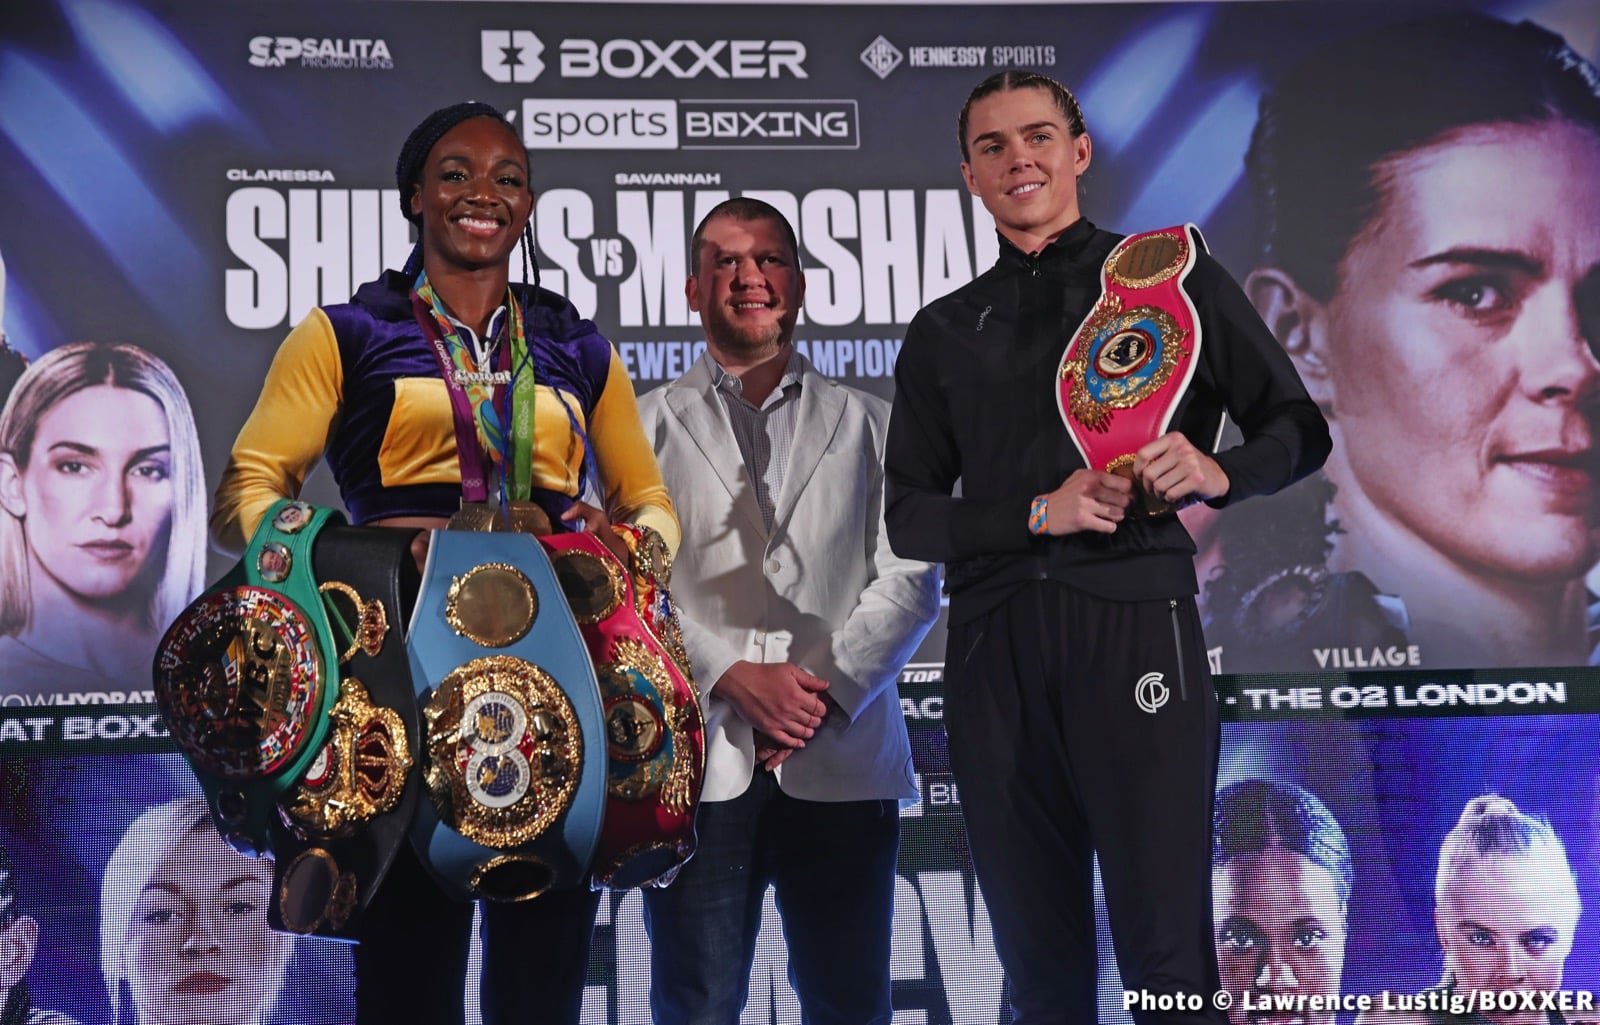 Shields vs Marshall ESPN Final Press Conference From London - Boxing Image